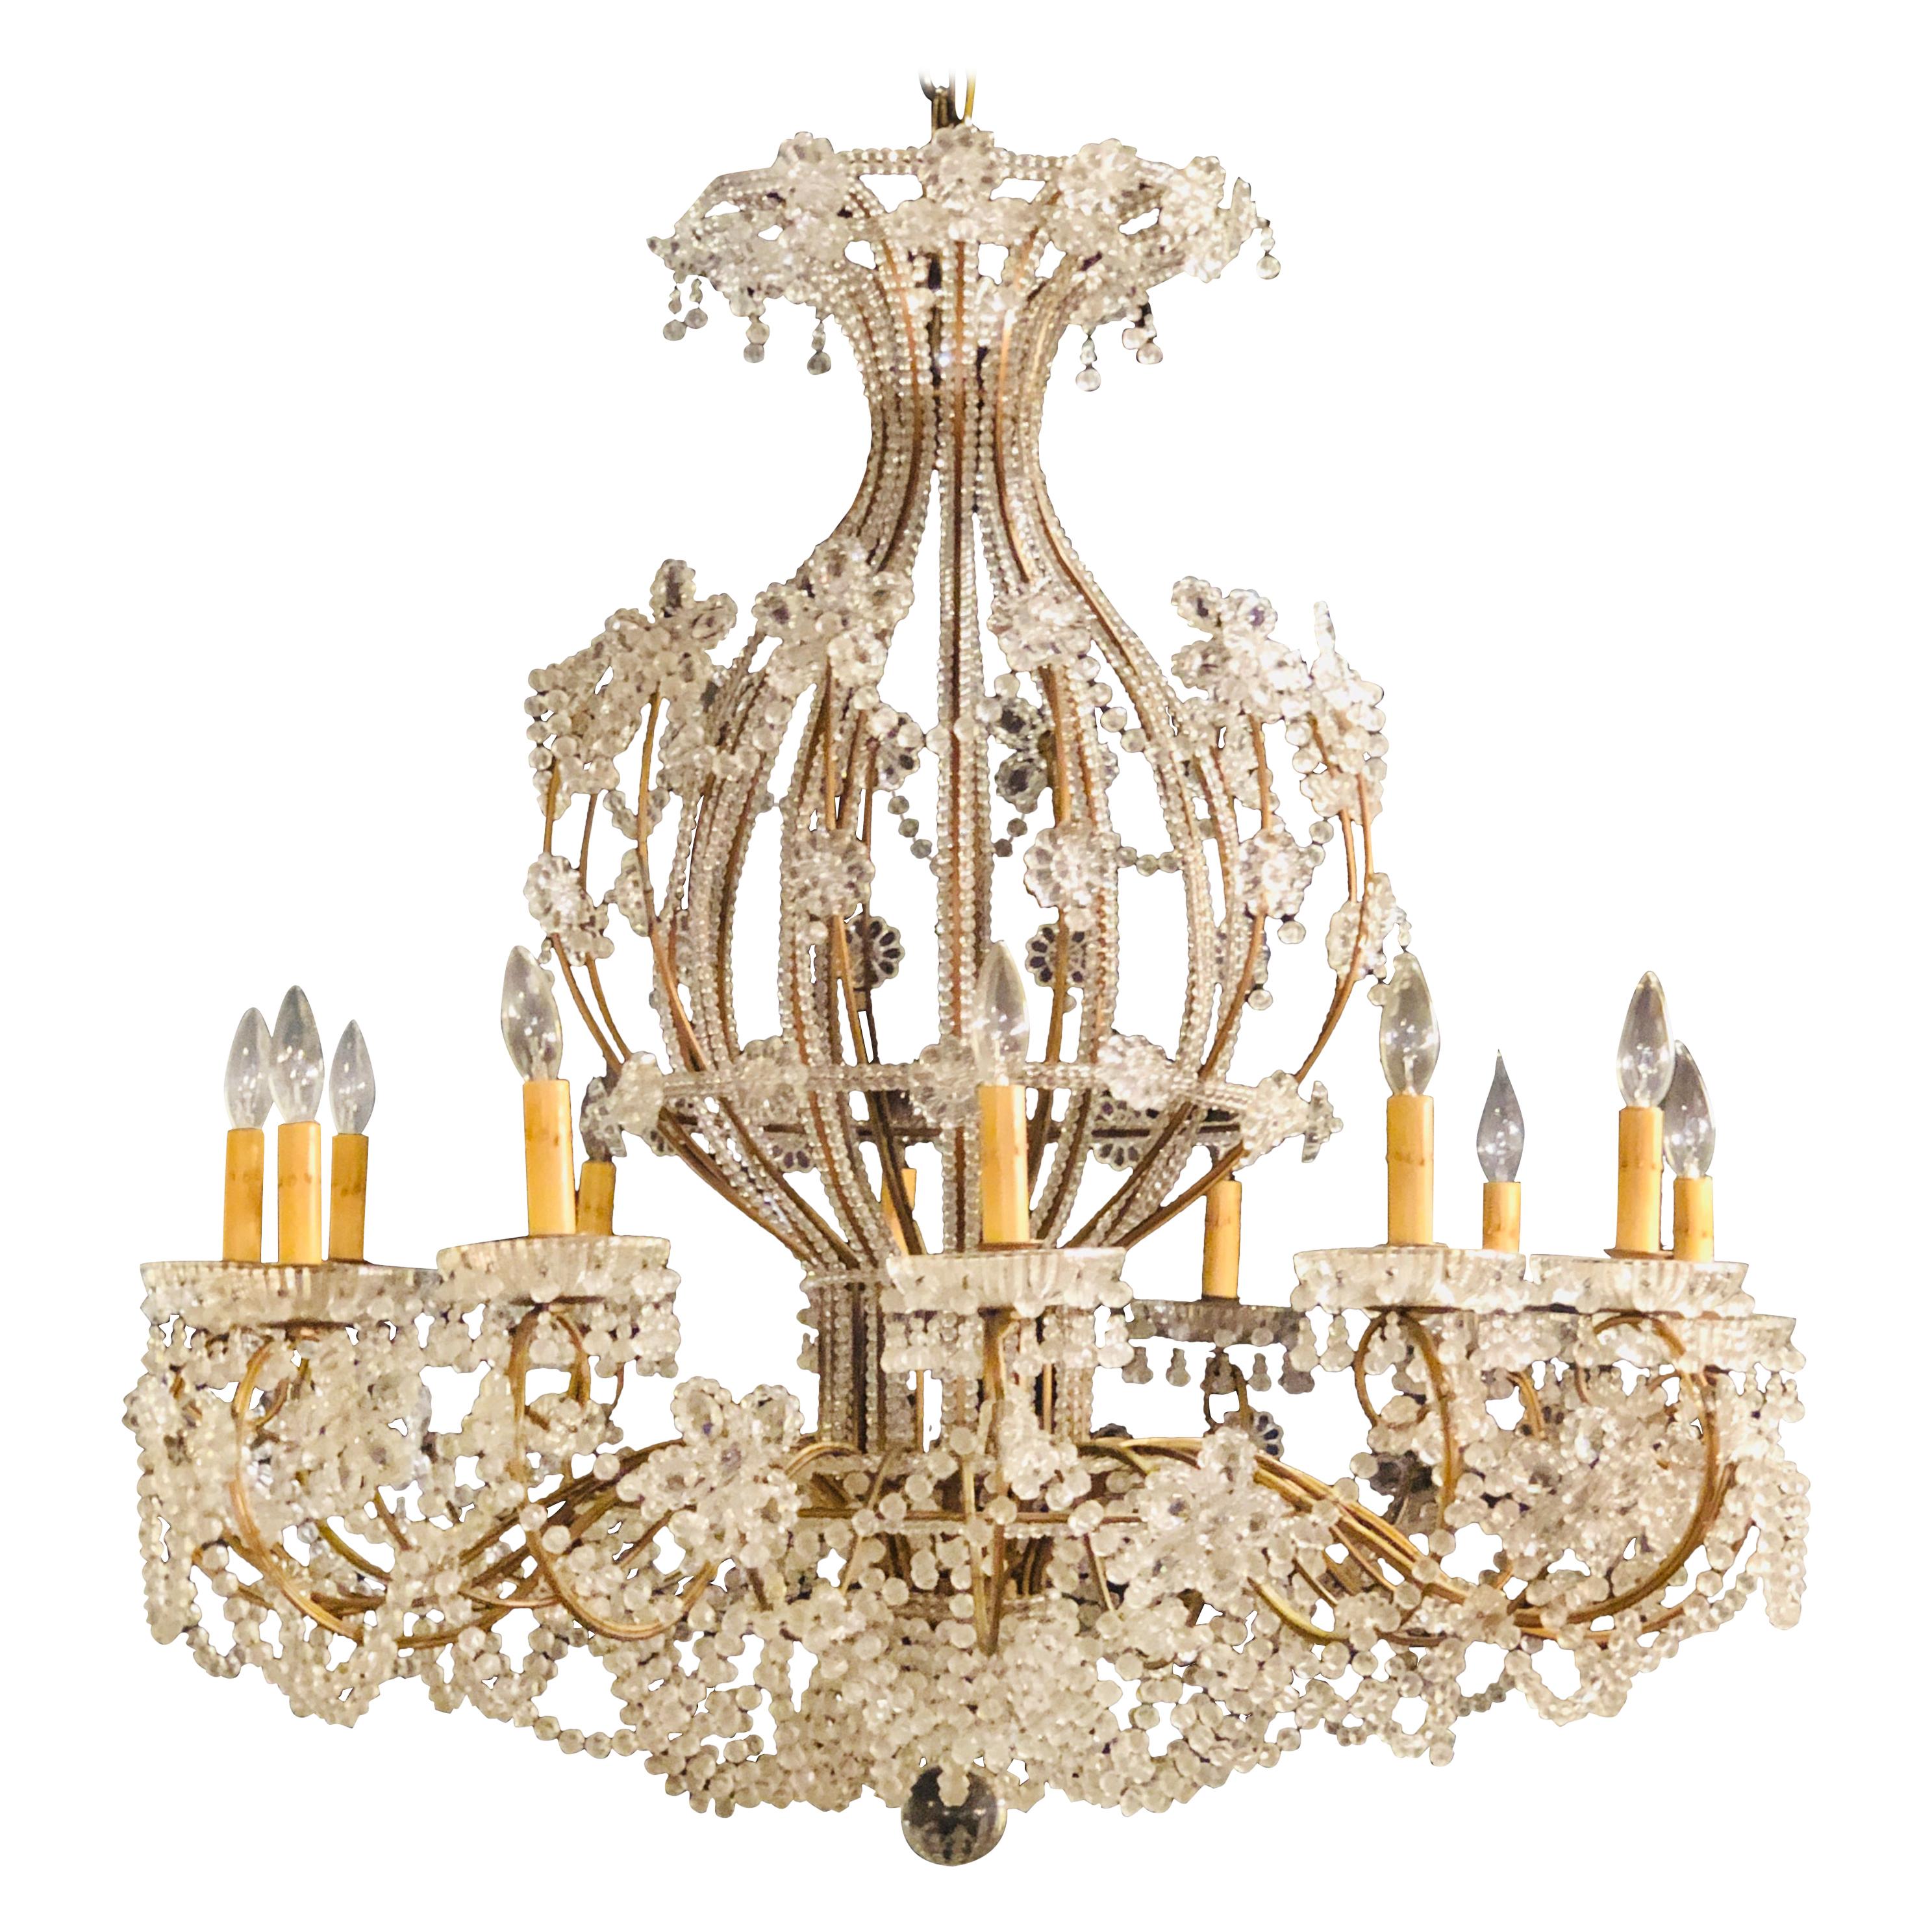 Beautiful Gilt Iron 12-Light Chandelier with Great Crystal and Bead Decoration